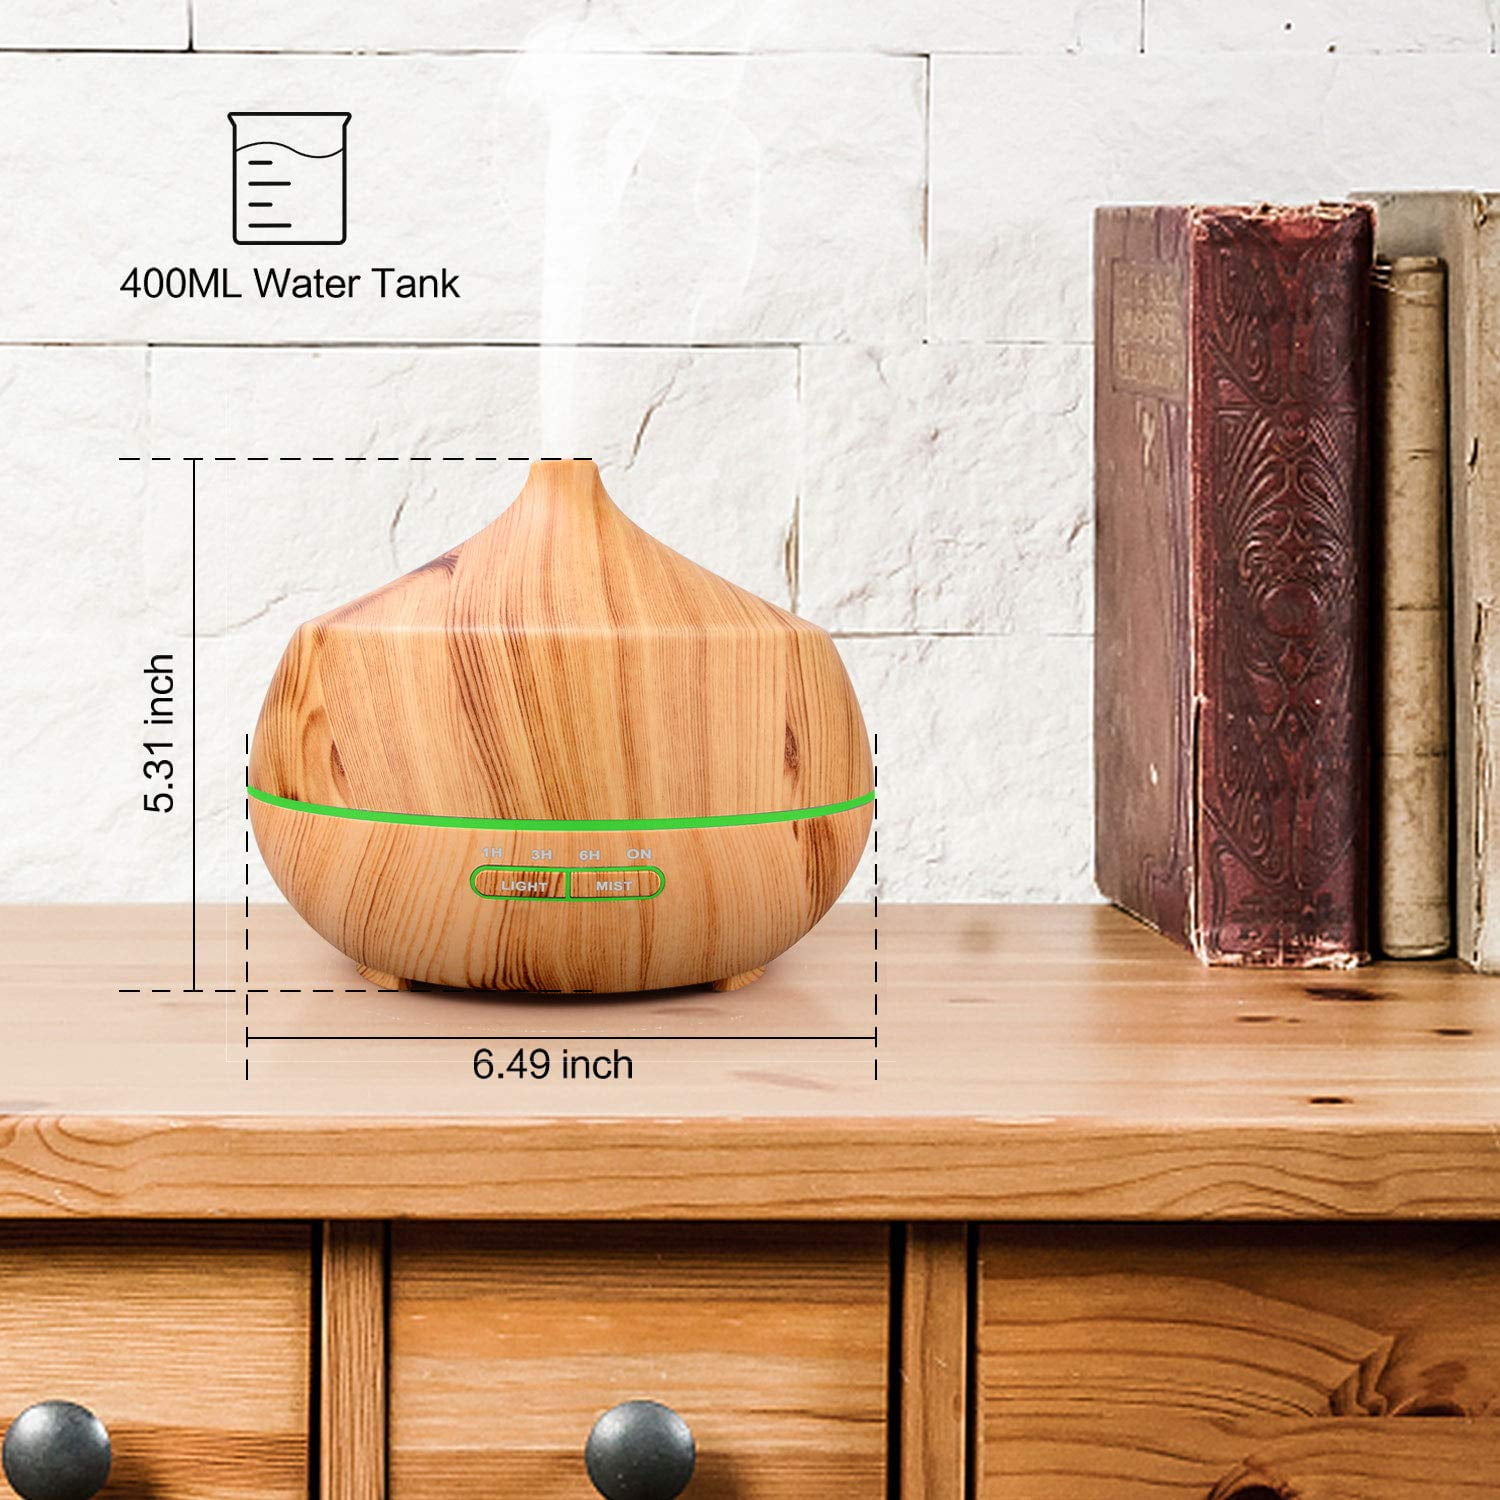 Details about   RENWER Essential Oil Diffuser 400ml Wood Grain Ultrasonic Cool Mist Humidifier, 